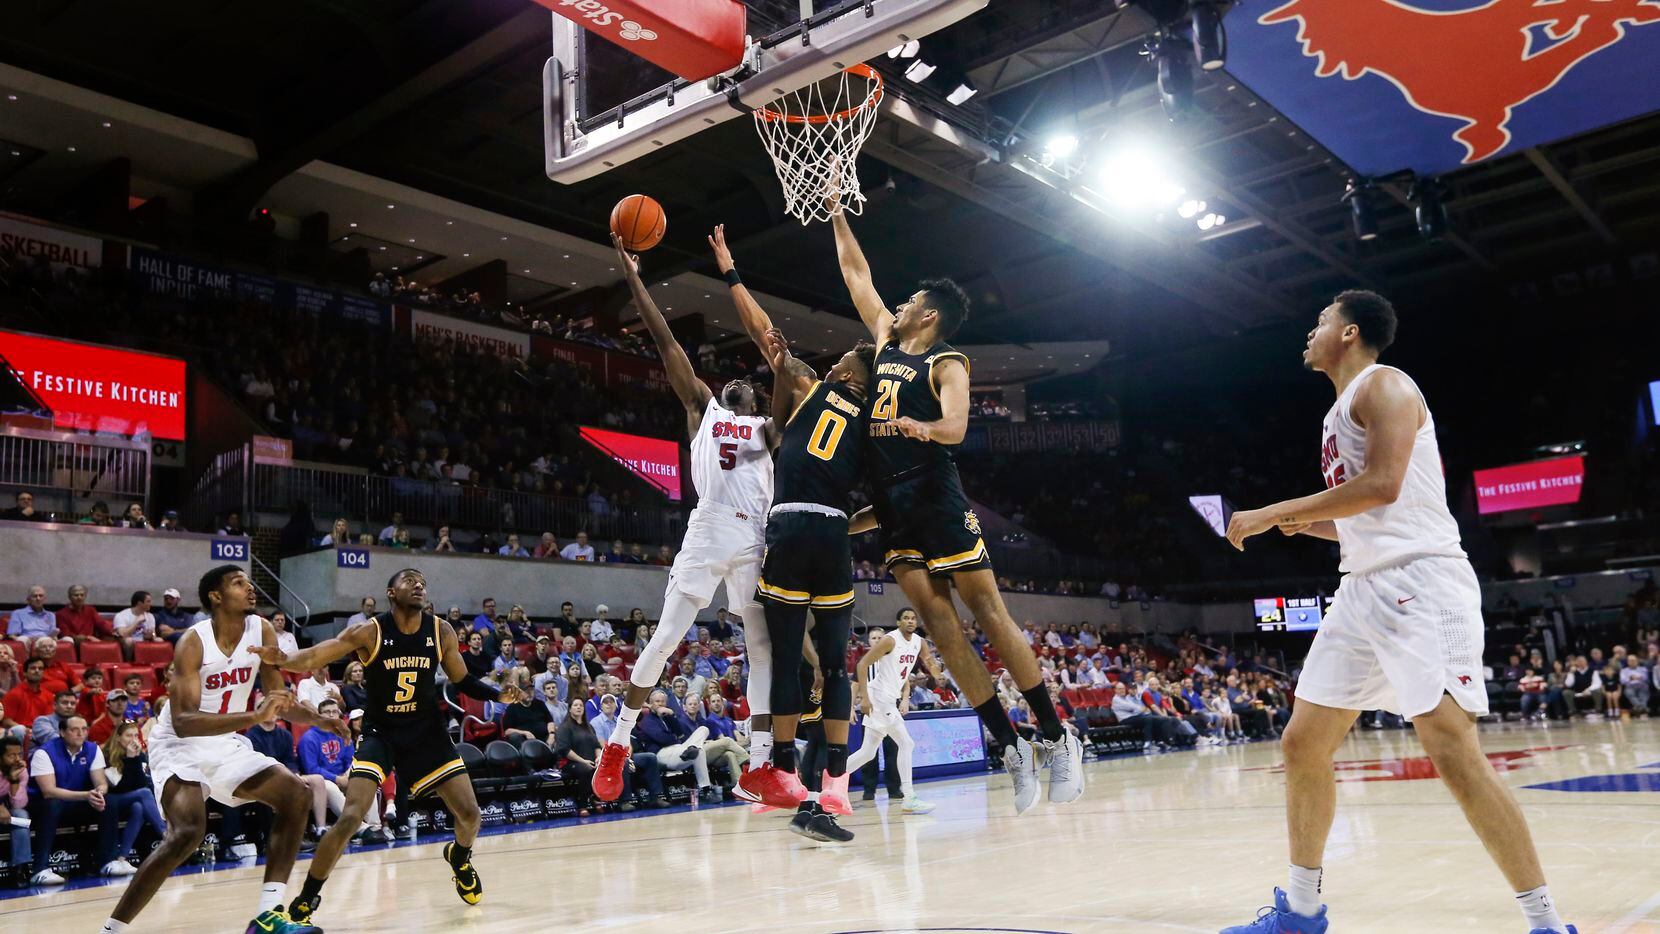 Southern Methodist Mustangs guard Emmanuel Bandoumel (5) goes up for a shot past Wichita State Shockers guard Dexter Dennis (0) and center Jaime Echenique (21) during the first half of am NCAA men's basketball matchup between SMU and Wichita State on Sunday, March 1, 2020 at Moody Coliseum in University Park, Texas.